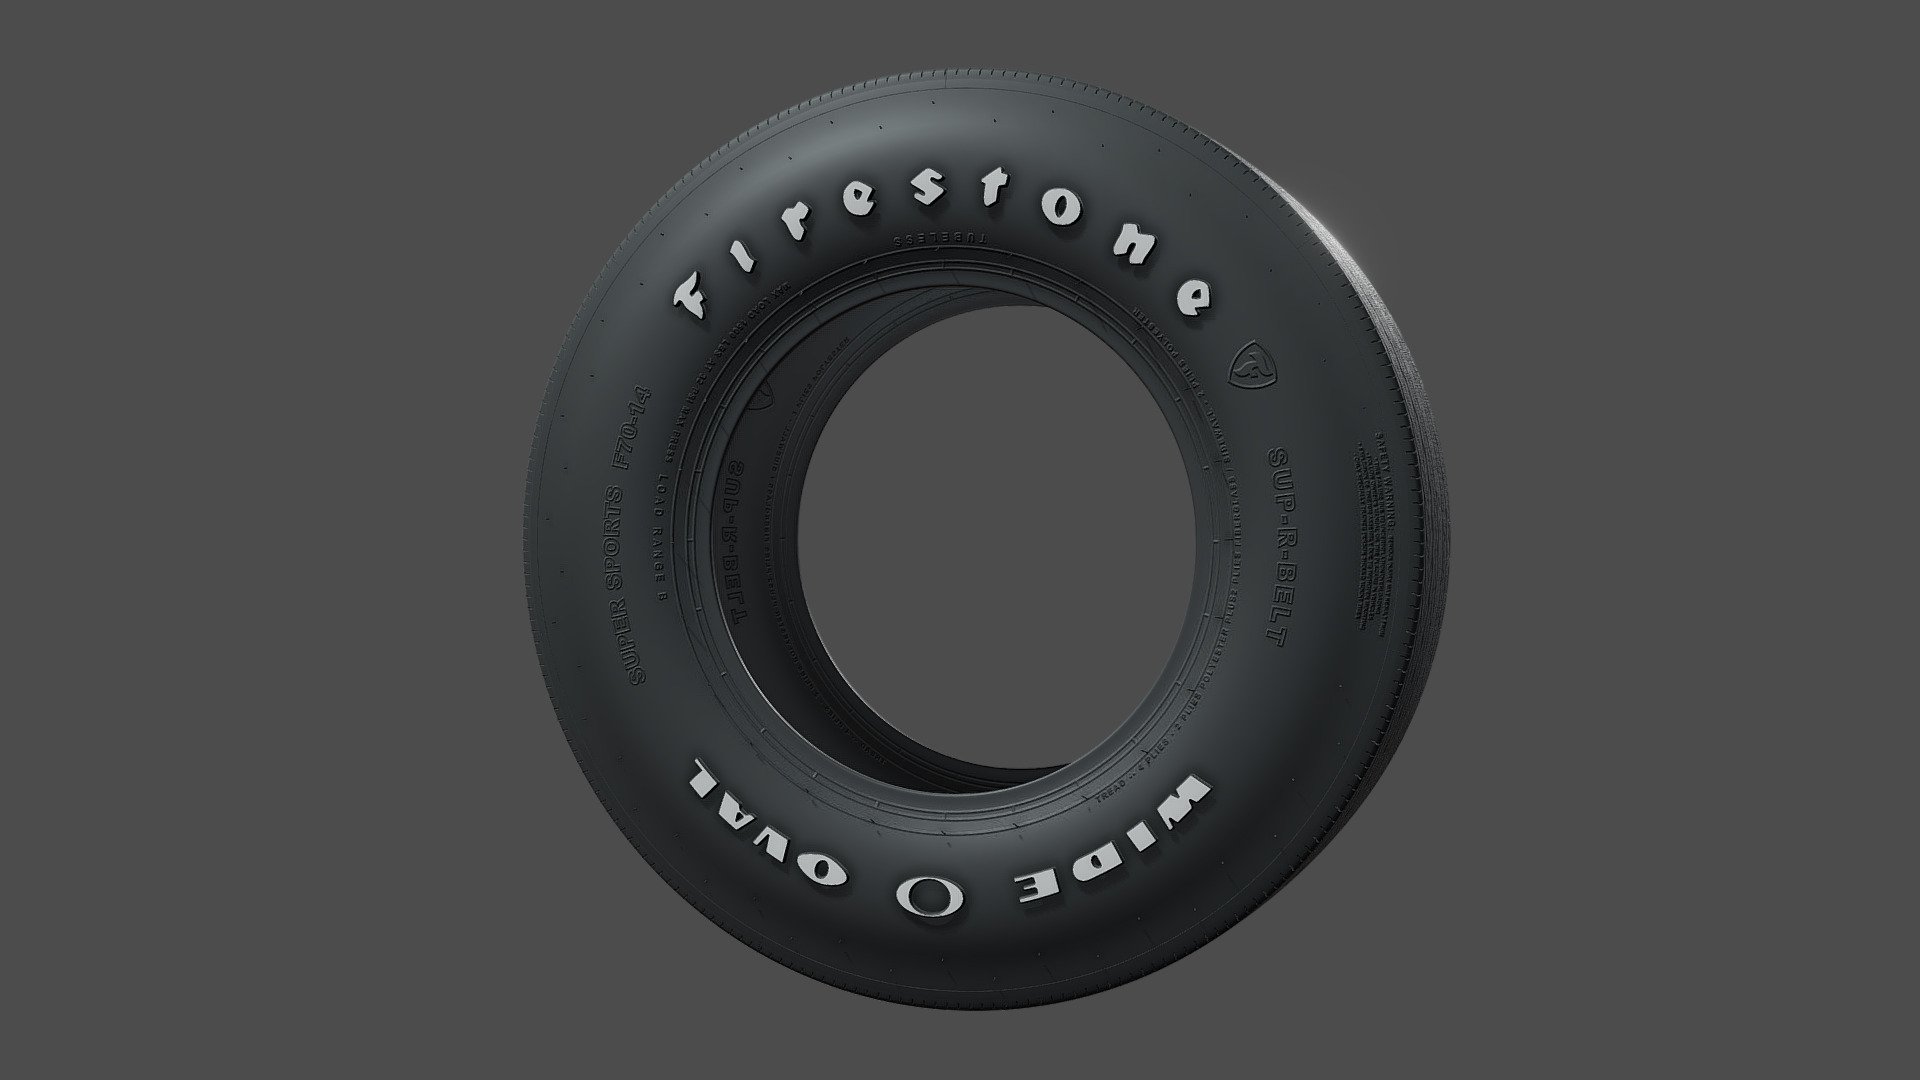 3D model of classic car tyre - Firestone F70 Wide Oval Radial. Two tyre sizes are included with this model - for 14 and 15 inch wheels. This iconic tyre will be perfect match for any American muscle car ofold era. Model is made precisely to real world dimensions and should fit perfectly on 14 and 15 inch wheels.




Materials are prepared for Corona renderer.

Model is partially unwrapped for correct placement of sidewall textures. Rest of the tyre is mapped with render-time triplanar mapping. Please keep this in mind if you plan to use the model outside of 3ds Max and Corona combo. Sketchfab preview doesn't show full texturing due to this limitation.
 - Firestone F70-14 Tyre - Buy Royalty Free 3D model by romullus 3d model